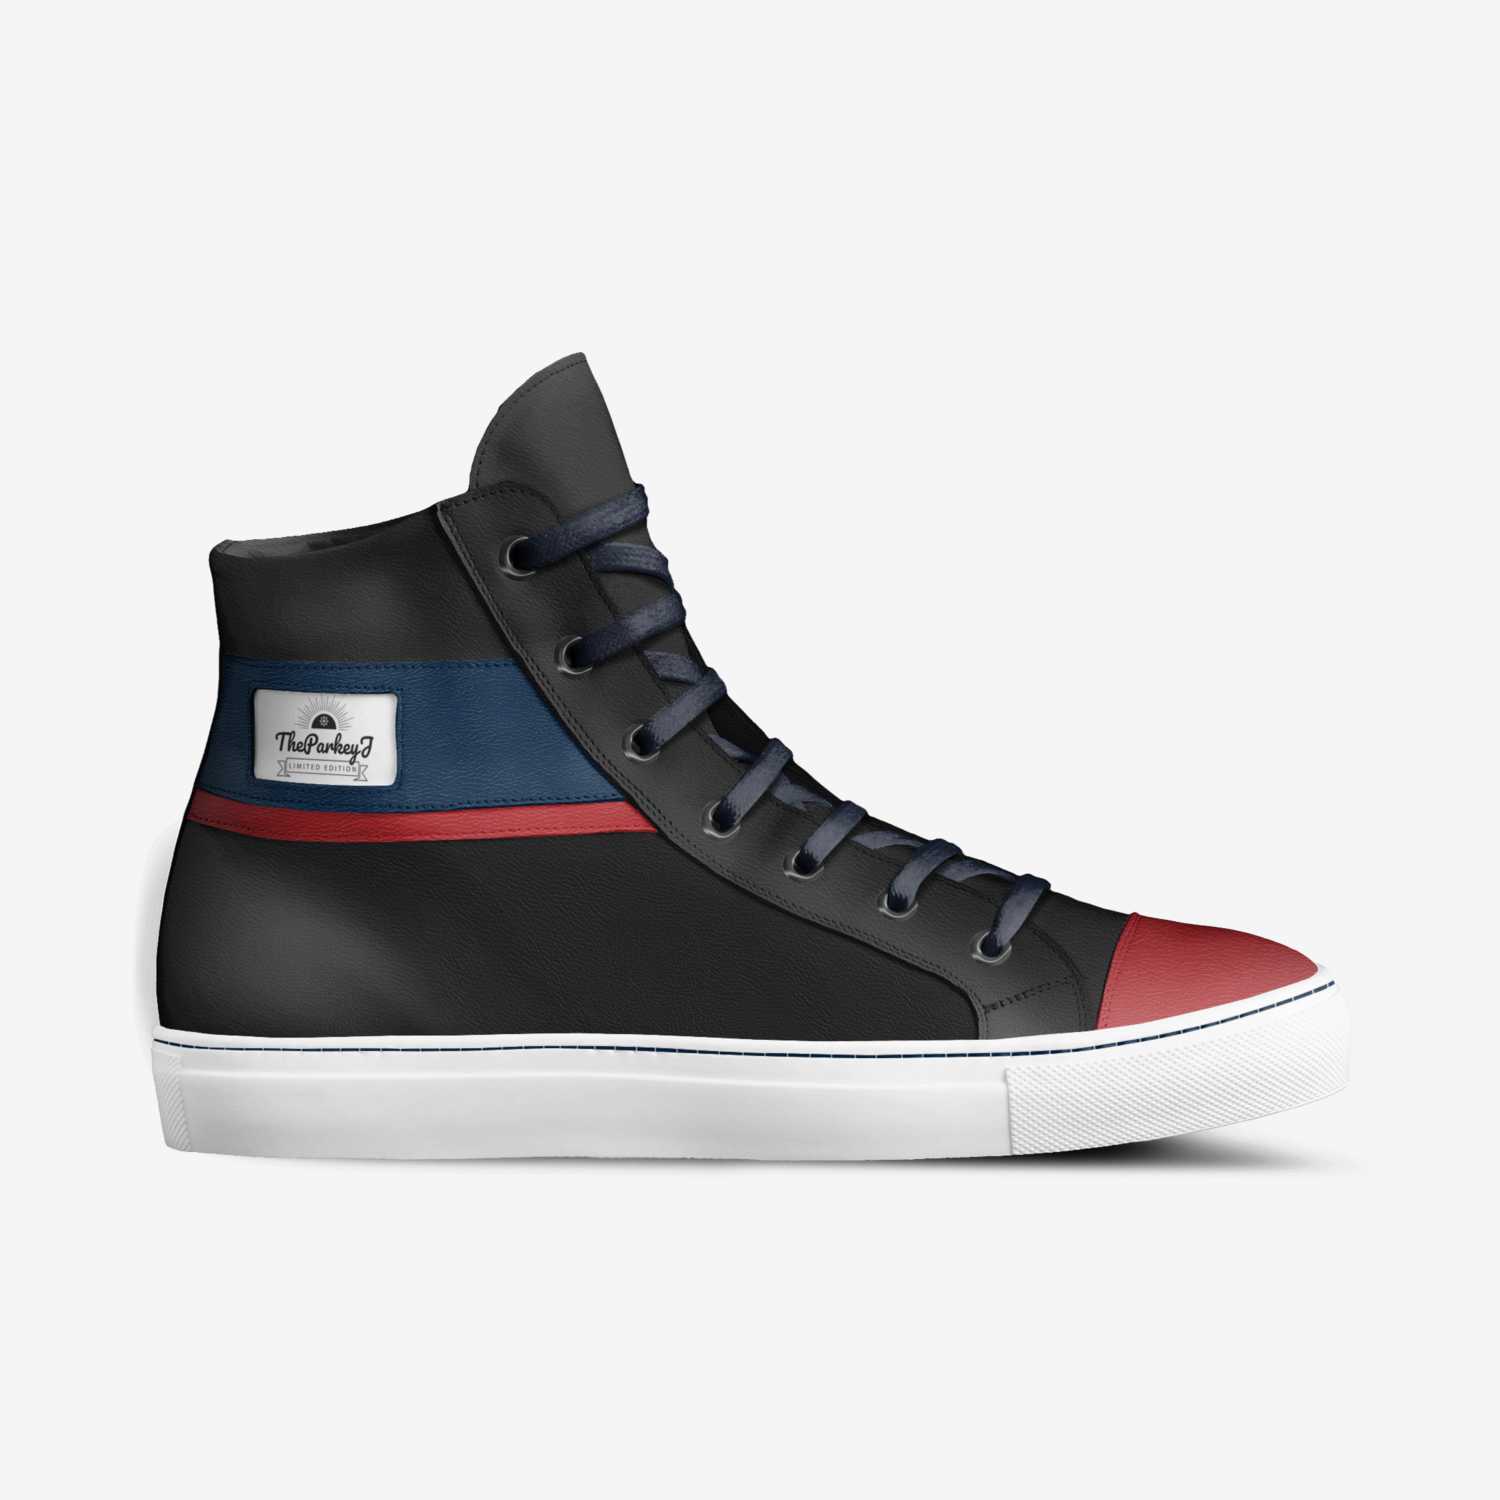 Axel's custom made in Italy shoes by Parker Jorgensen | Side view